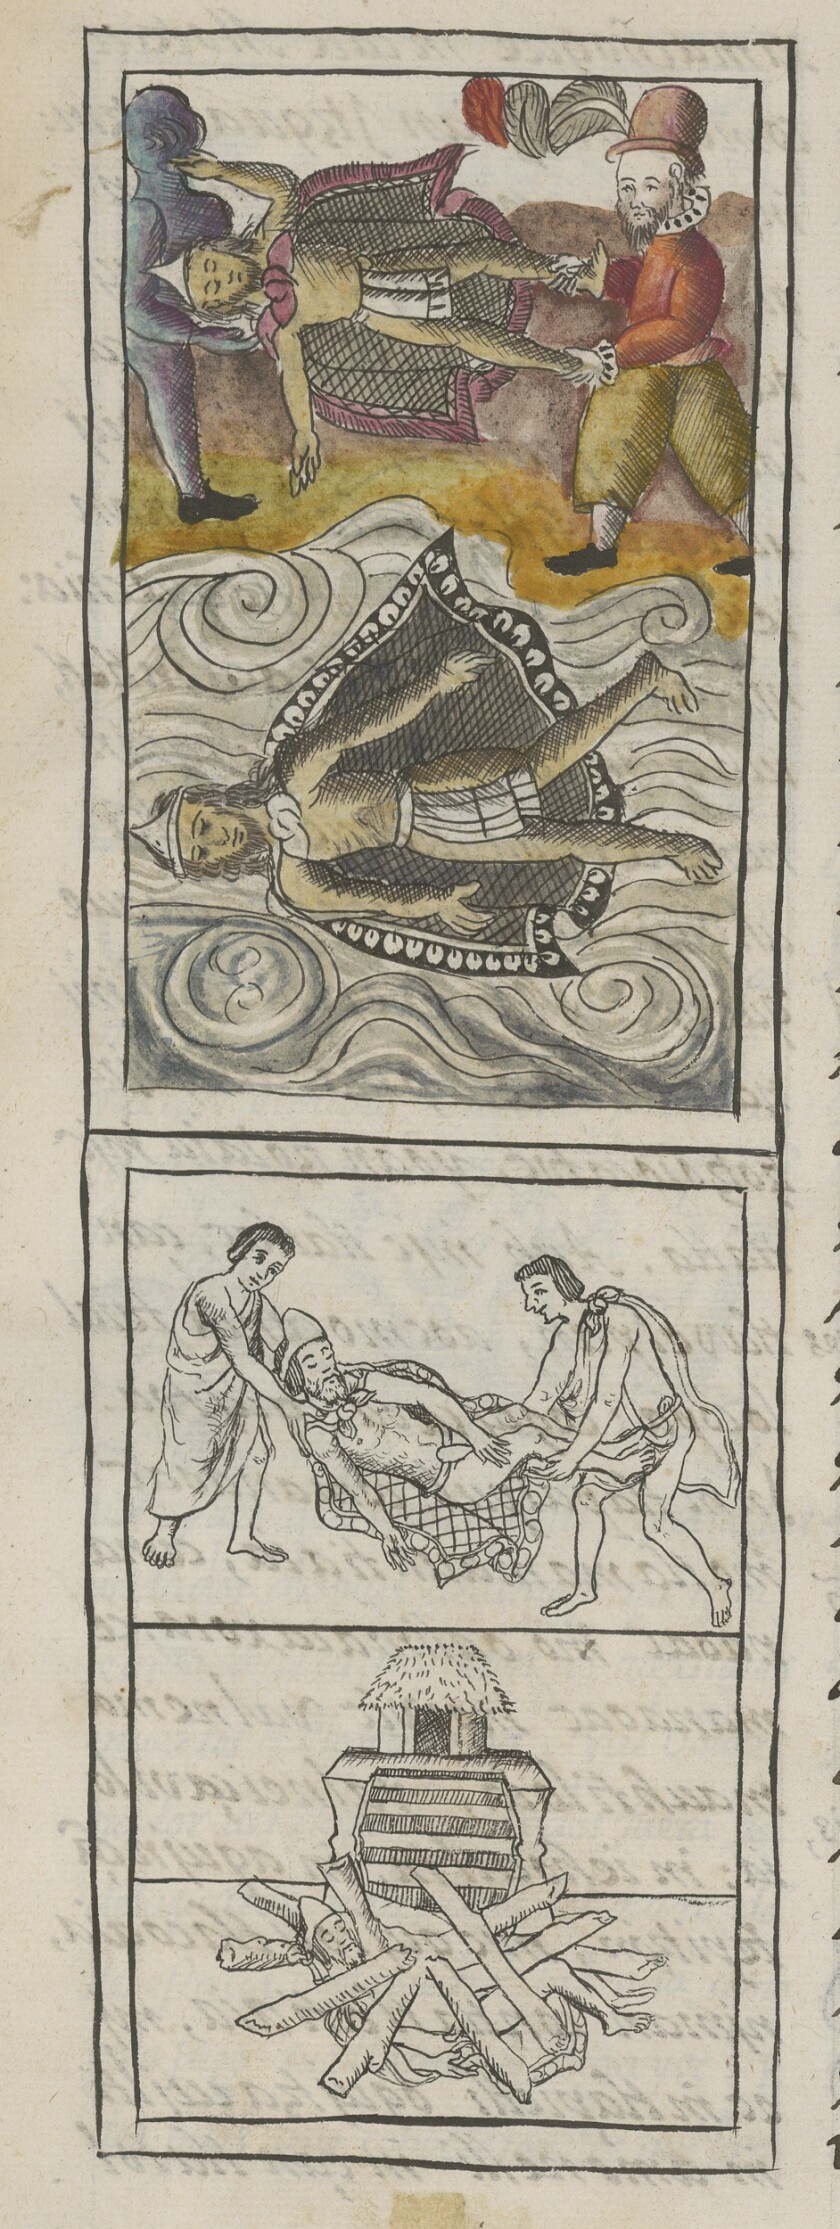 A detail from the Florentine Codex shows Spaniards disposing of the dead bodies of leaders Moctezuma and Itzquauhtzin